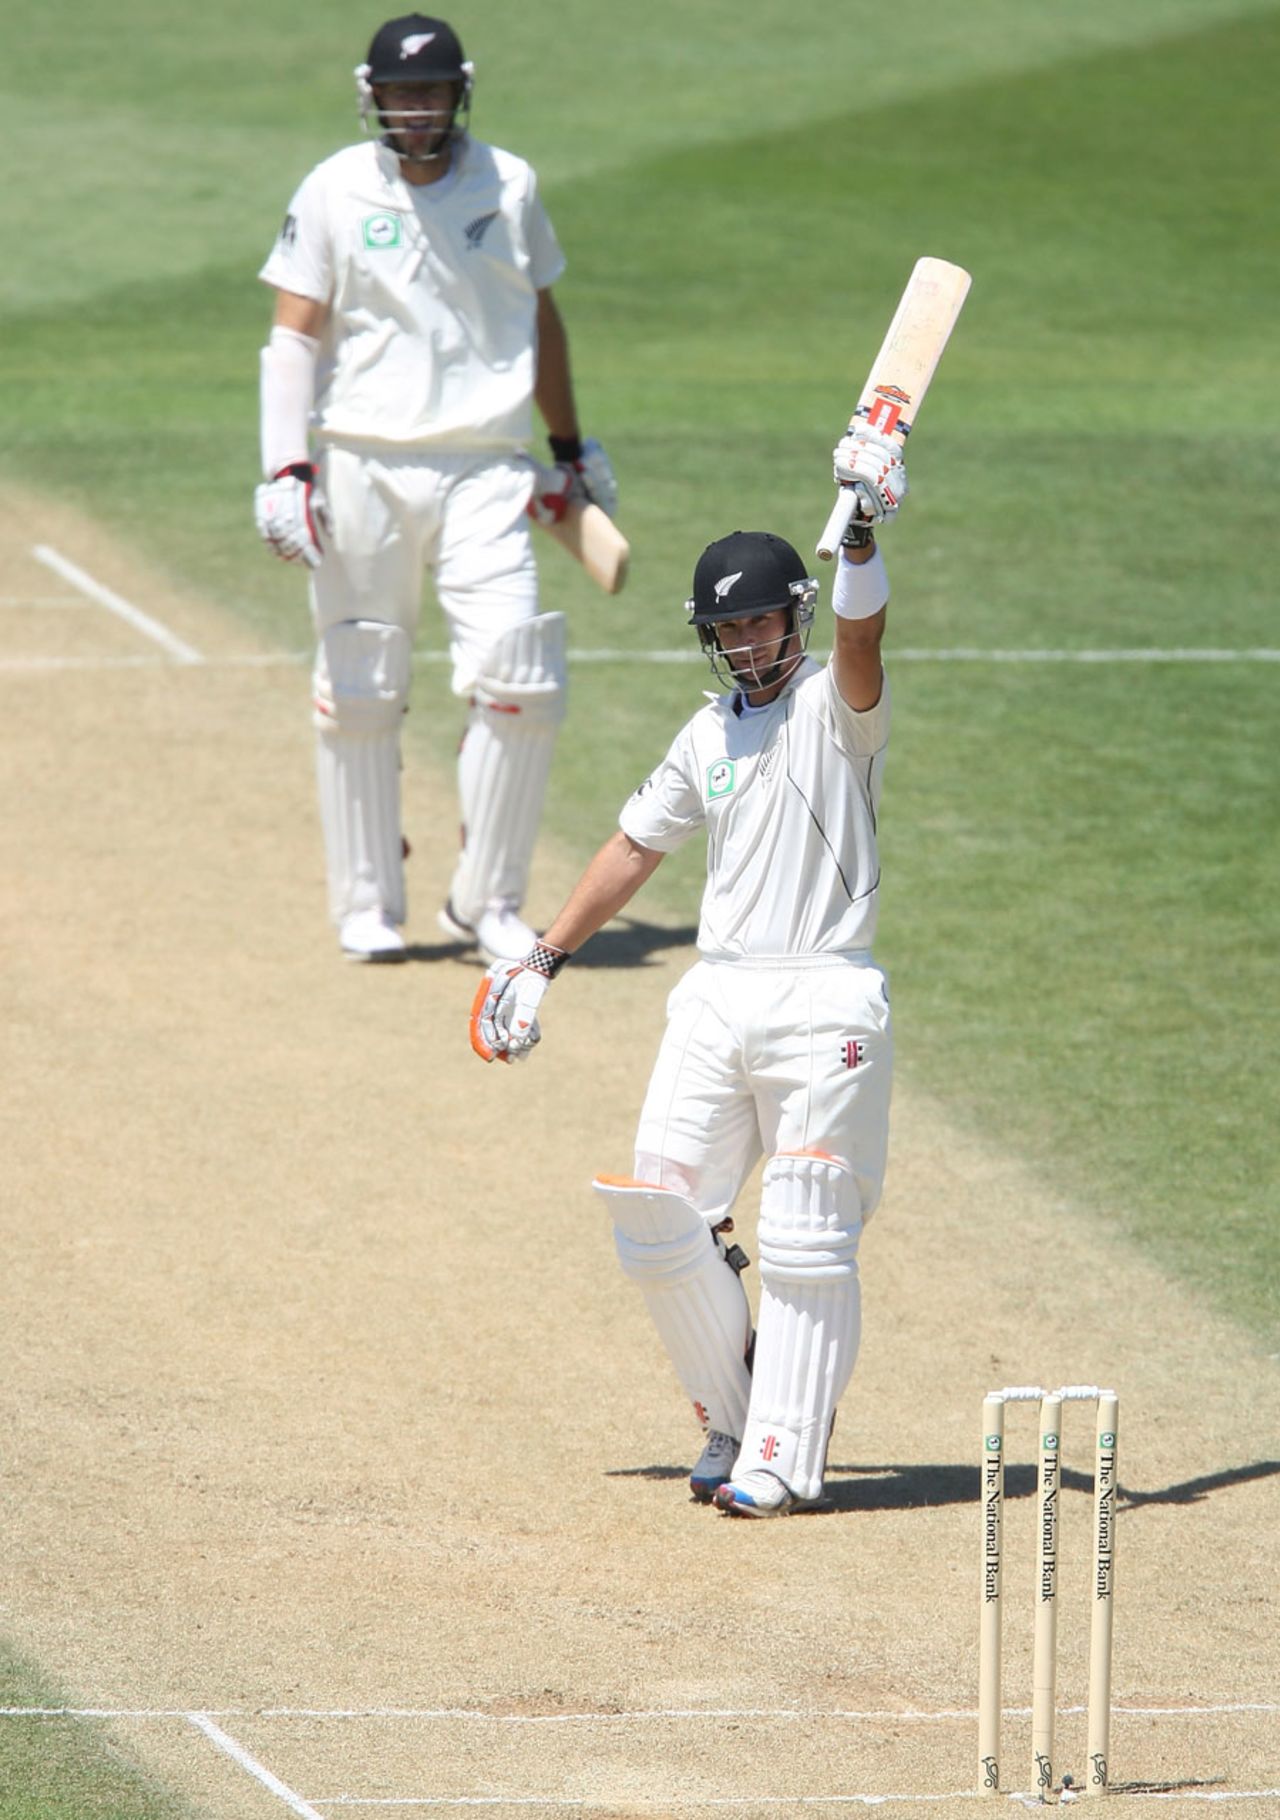 Daniel Vettori watches as Reece Young brings up his half-century, New Zealand v Pakistan, 2nd Test, Wellington, 2nd day, January 16, 2011